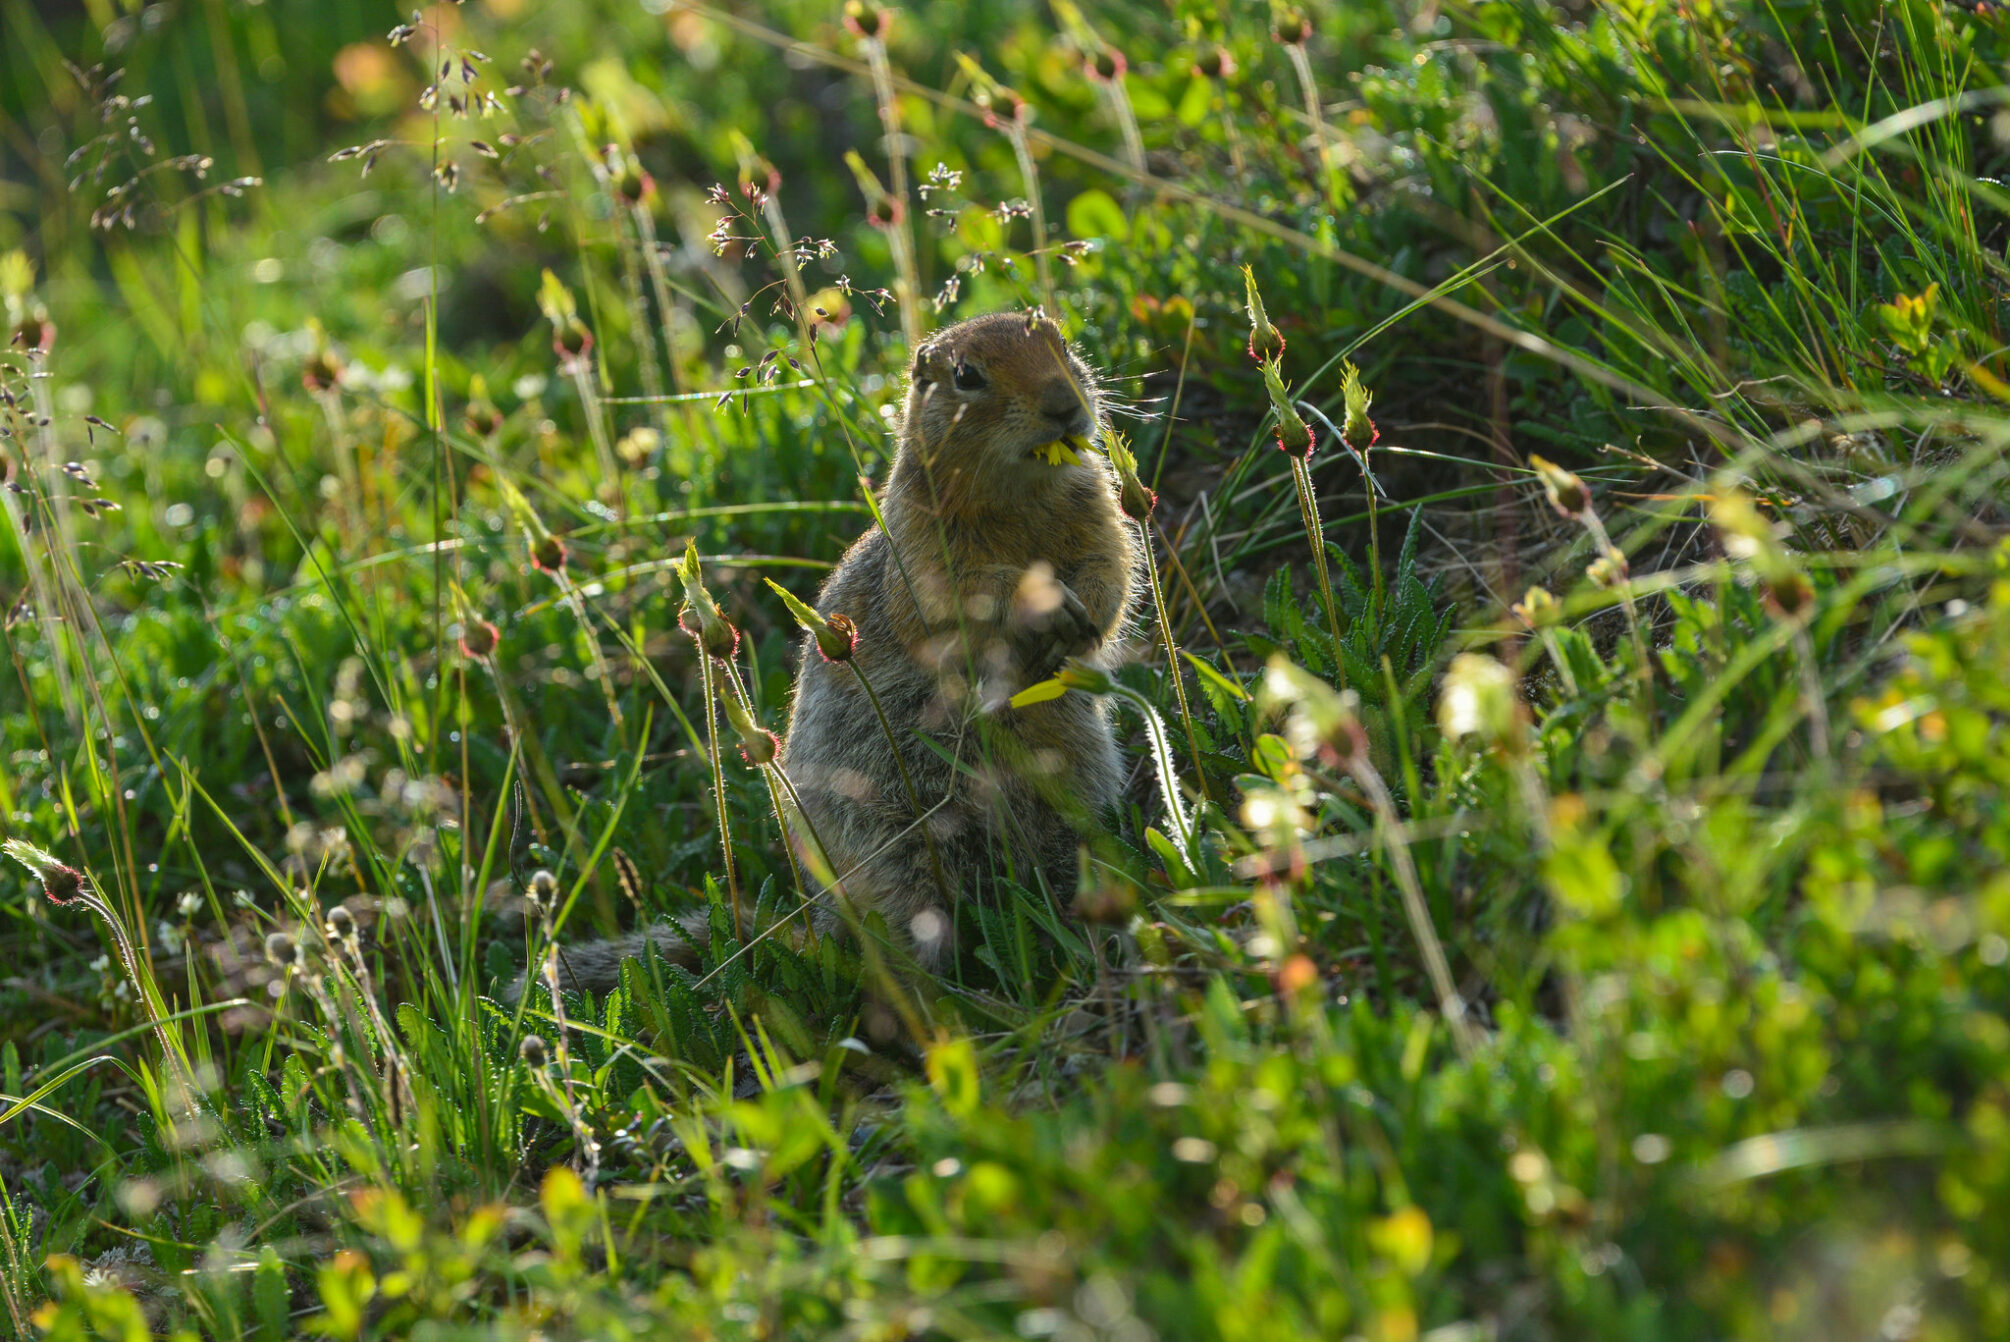 ground squirrel munches on nearby herbs